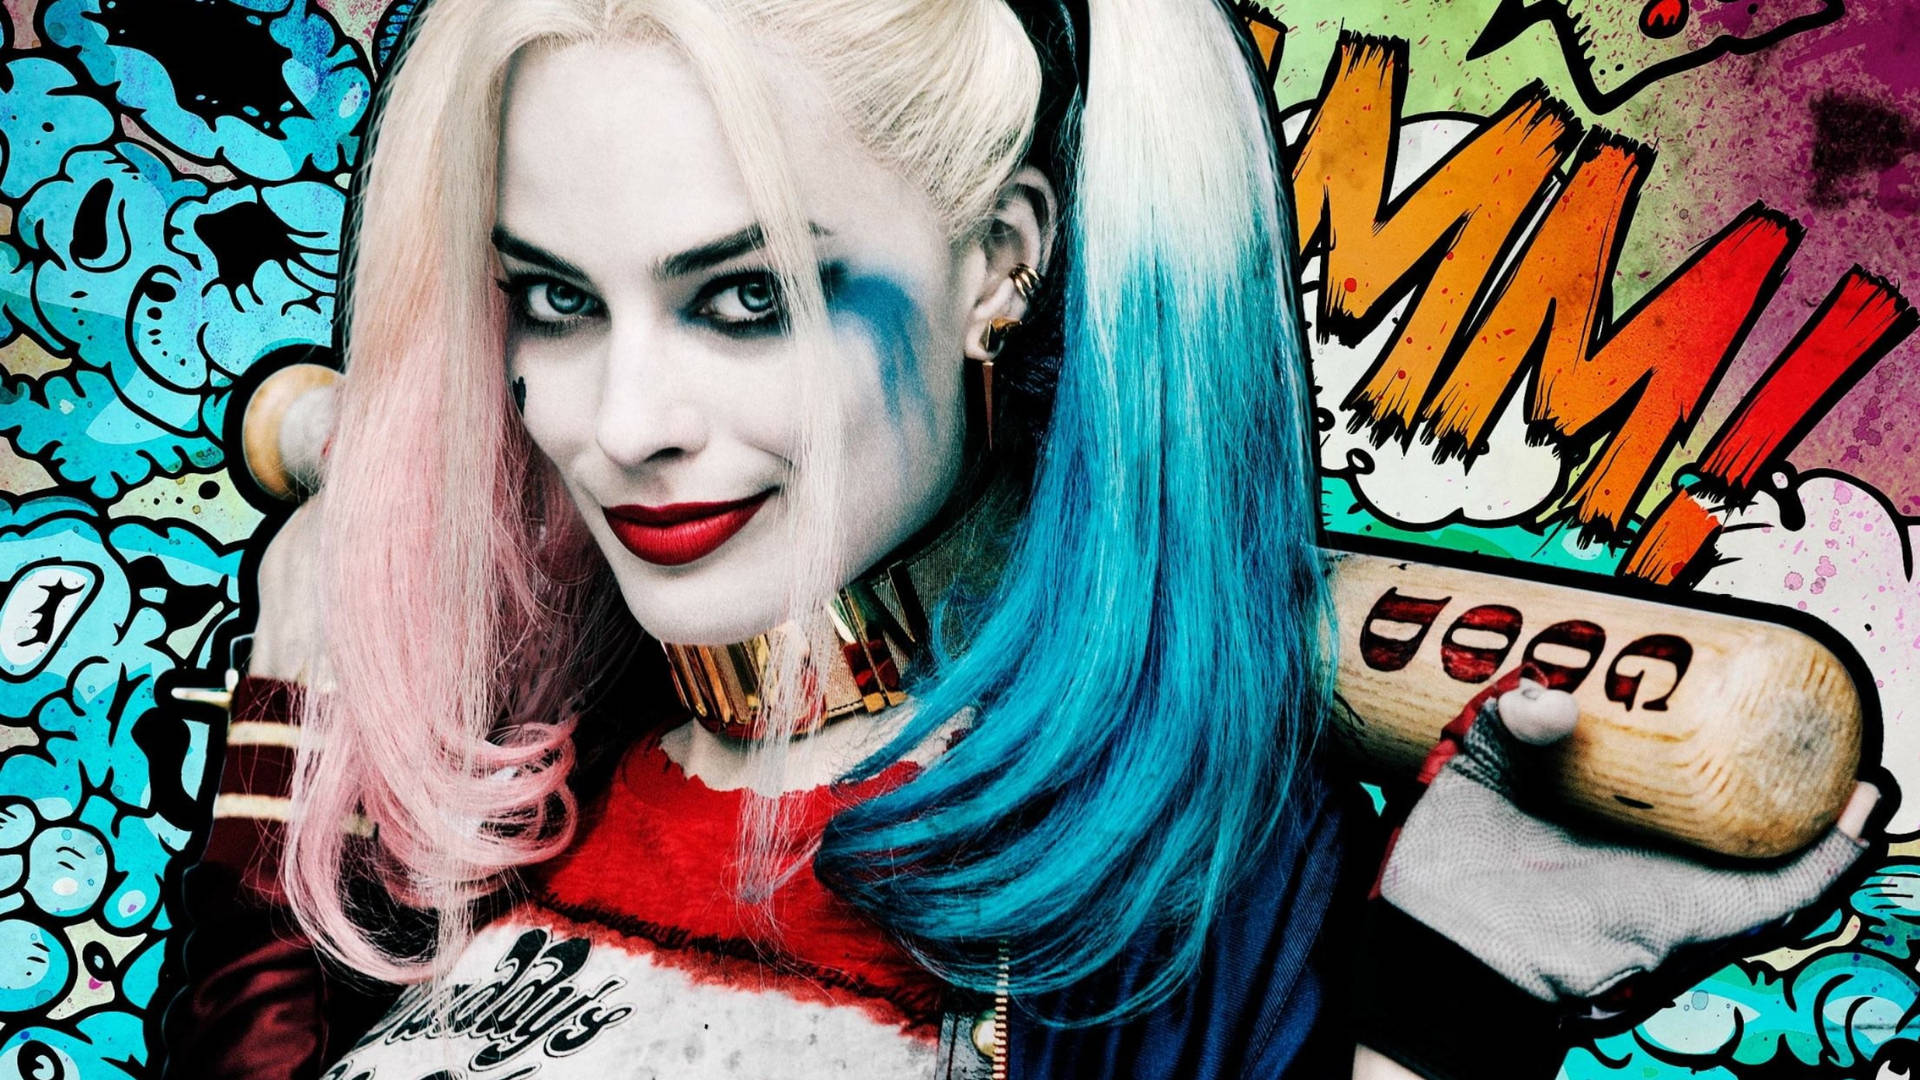 Harley Quinn The Suicide Squad Movie wallpaper